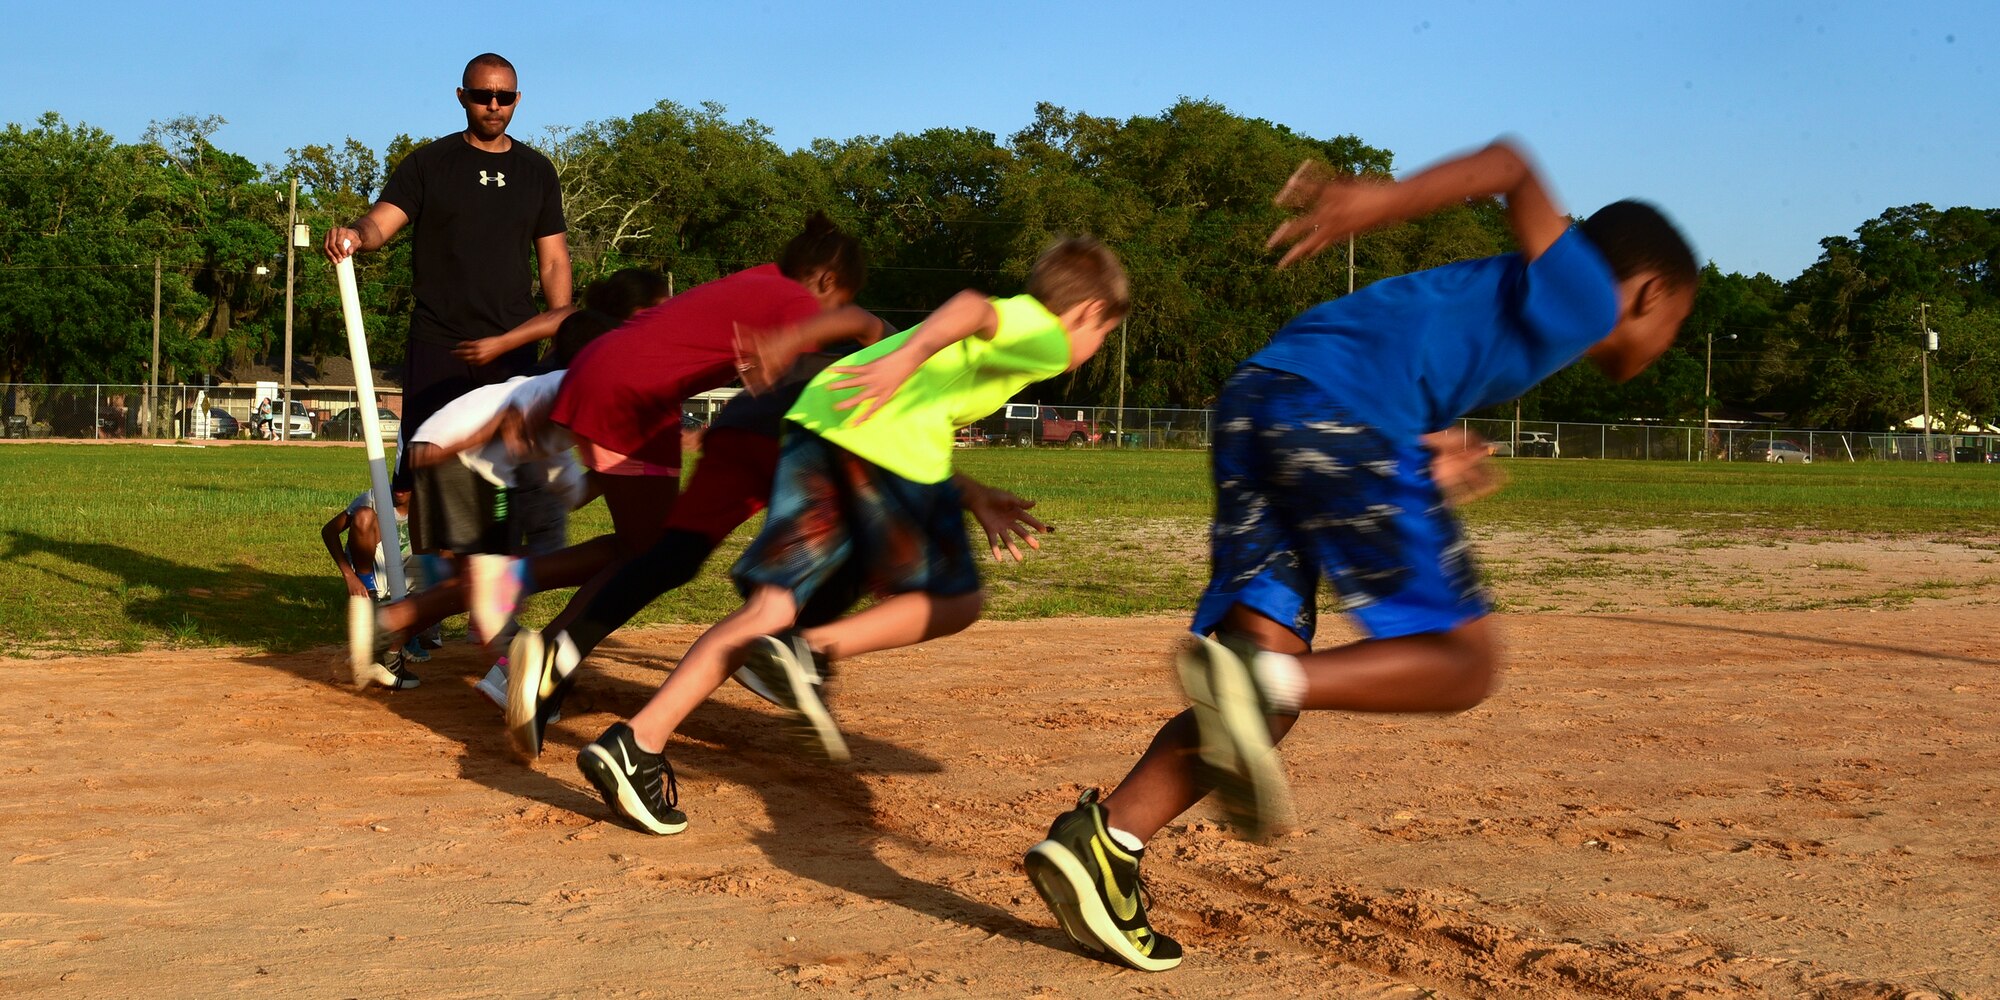 U.S. Air Force Senior Master Sgt. Antonio Mack, 325th Fighter Wing Air Forces Northern/Tyndall Command Center and 325th Fighter Wing Staff Agency superintendent, watches his athletes take off for a sprint exercise at Rutherford High School in Panama City, Fla., April 24, 2018. Mack coaches children in the local community, including his son, on both distance running and sprinting. (U.S. Air Force photo by Senior Airman Cody R. Miller/Released)